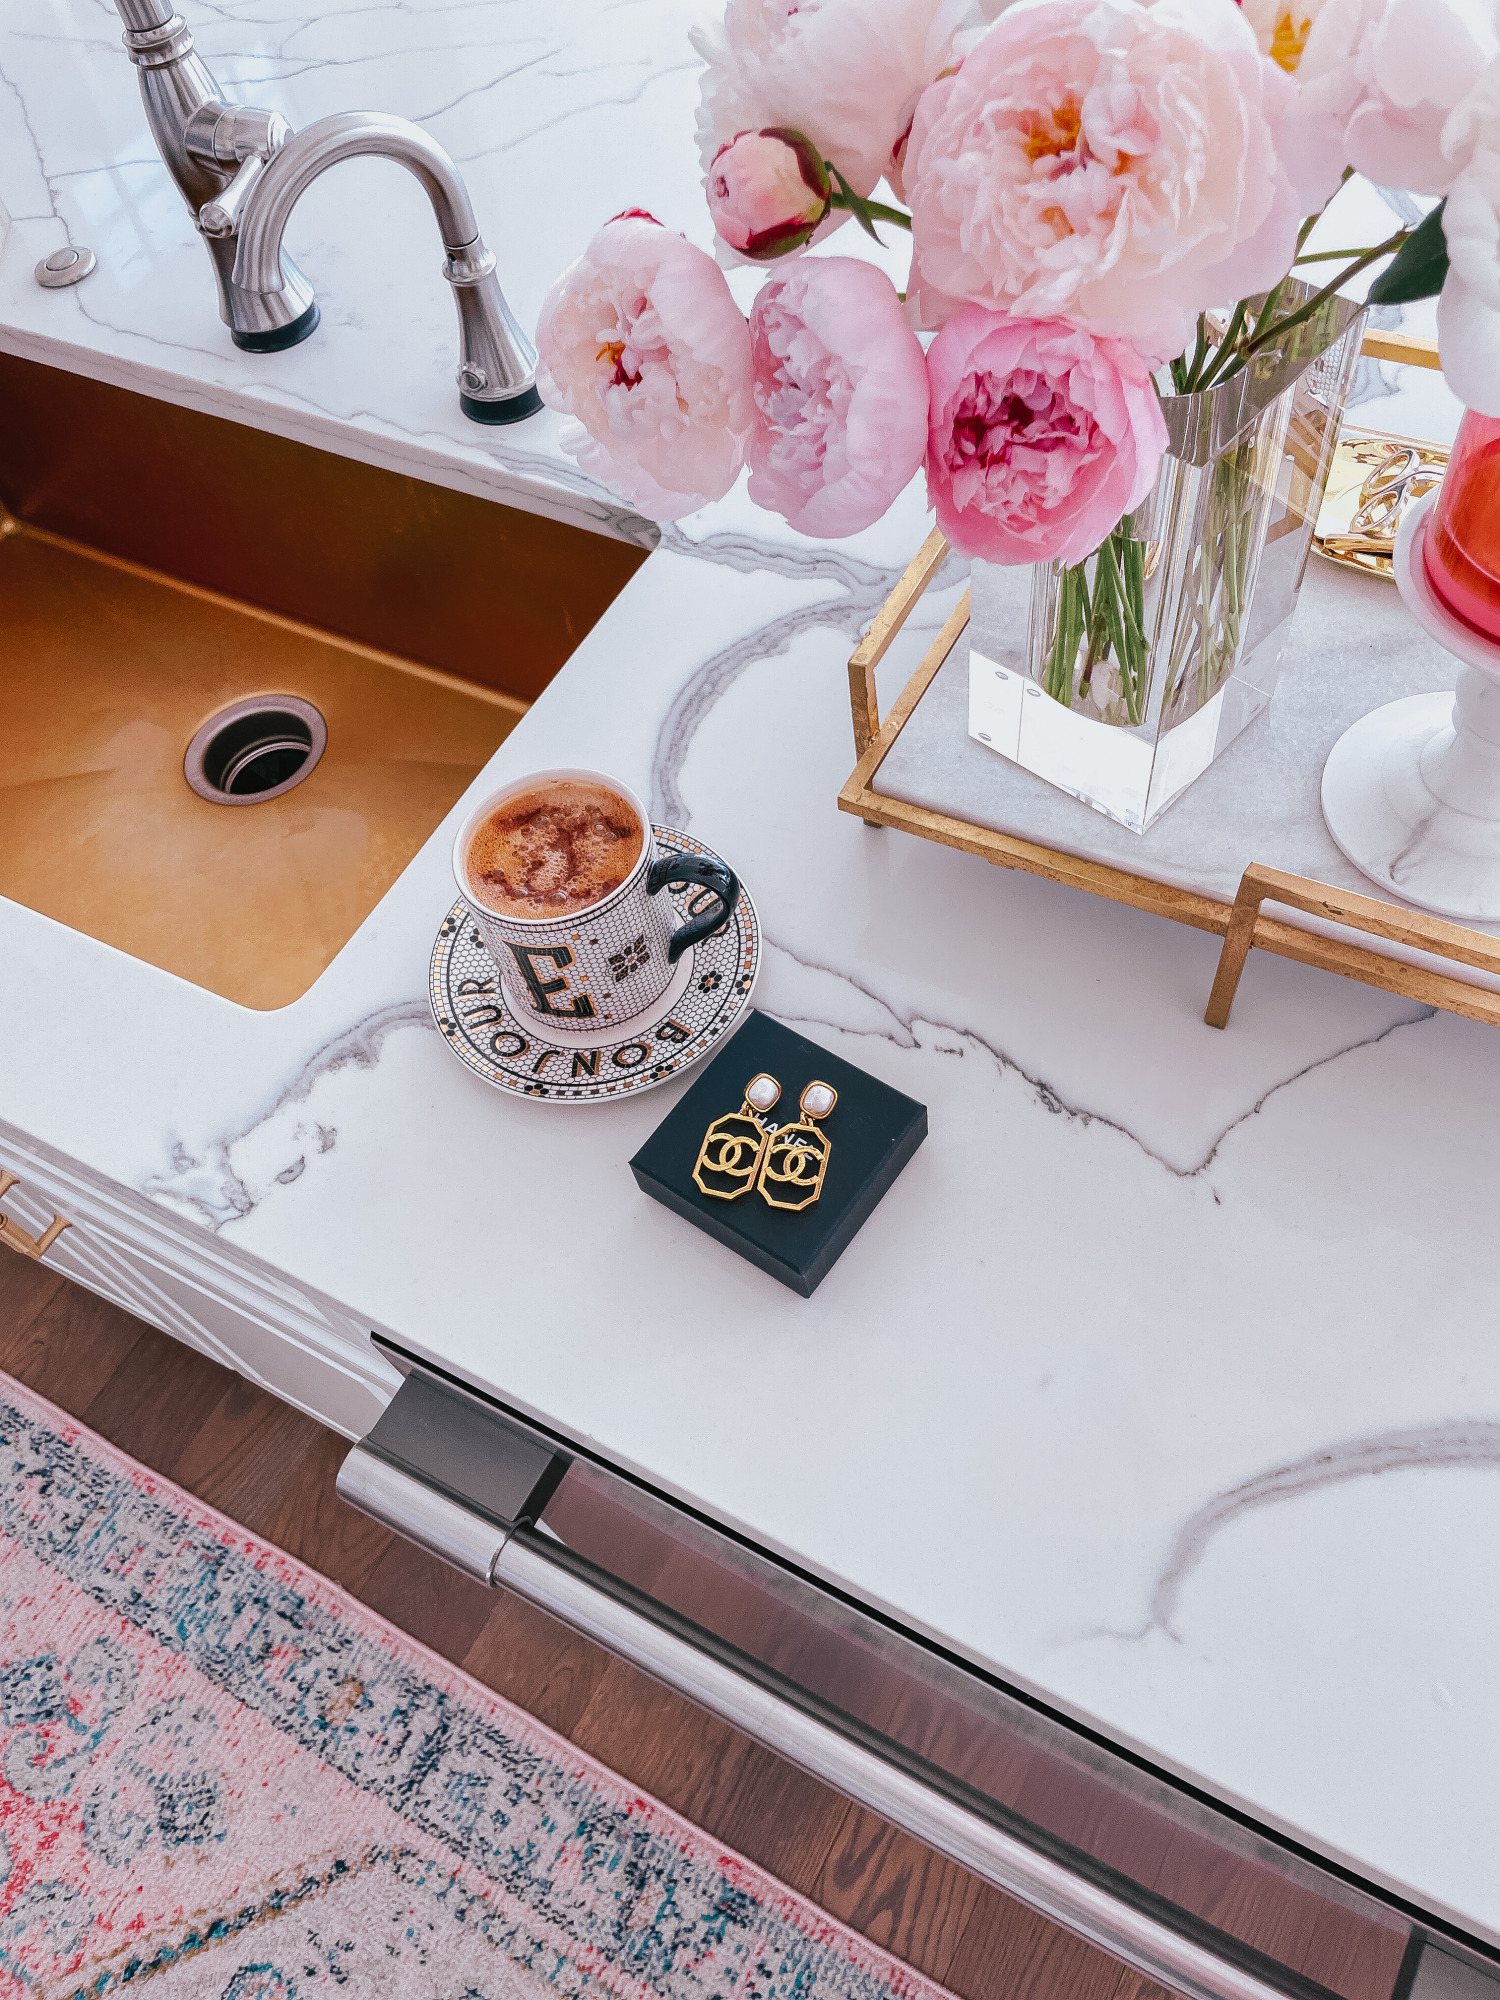 Emily-ann-gemma-kitchen-details-kitchen-decor-chanel-earrings-pretty-coffee-cup-peonies | Instagram Recap by popular US life and style blog, The Sweetest Thing: image of a black and white monogram Anthropologie mug and saucers next to a box of gold Chanel statement earrings a rose gold and white marble tray holding a clear glass vase filled with pink peonies. 